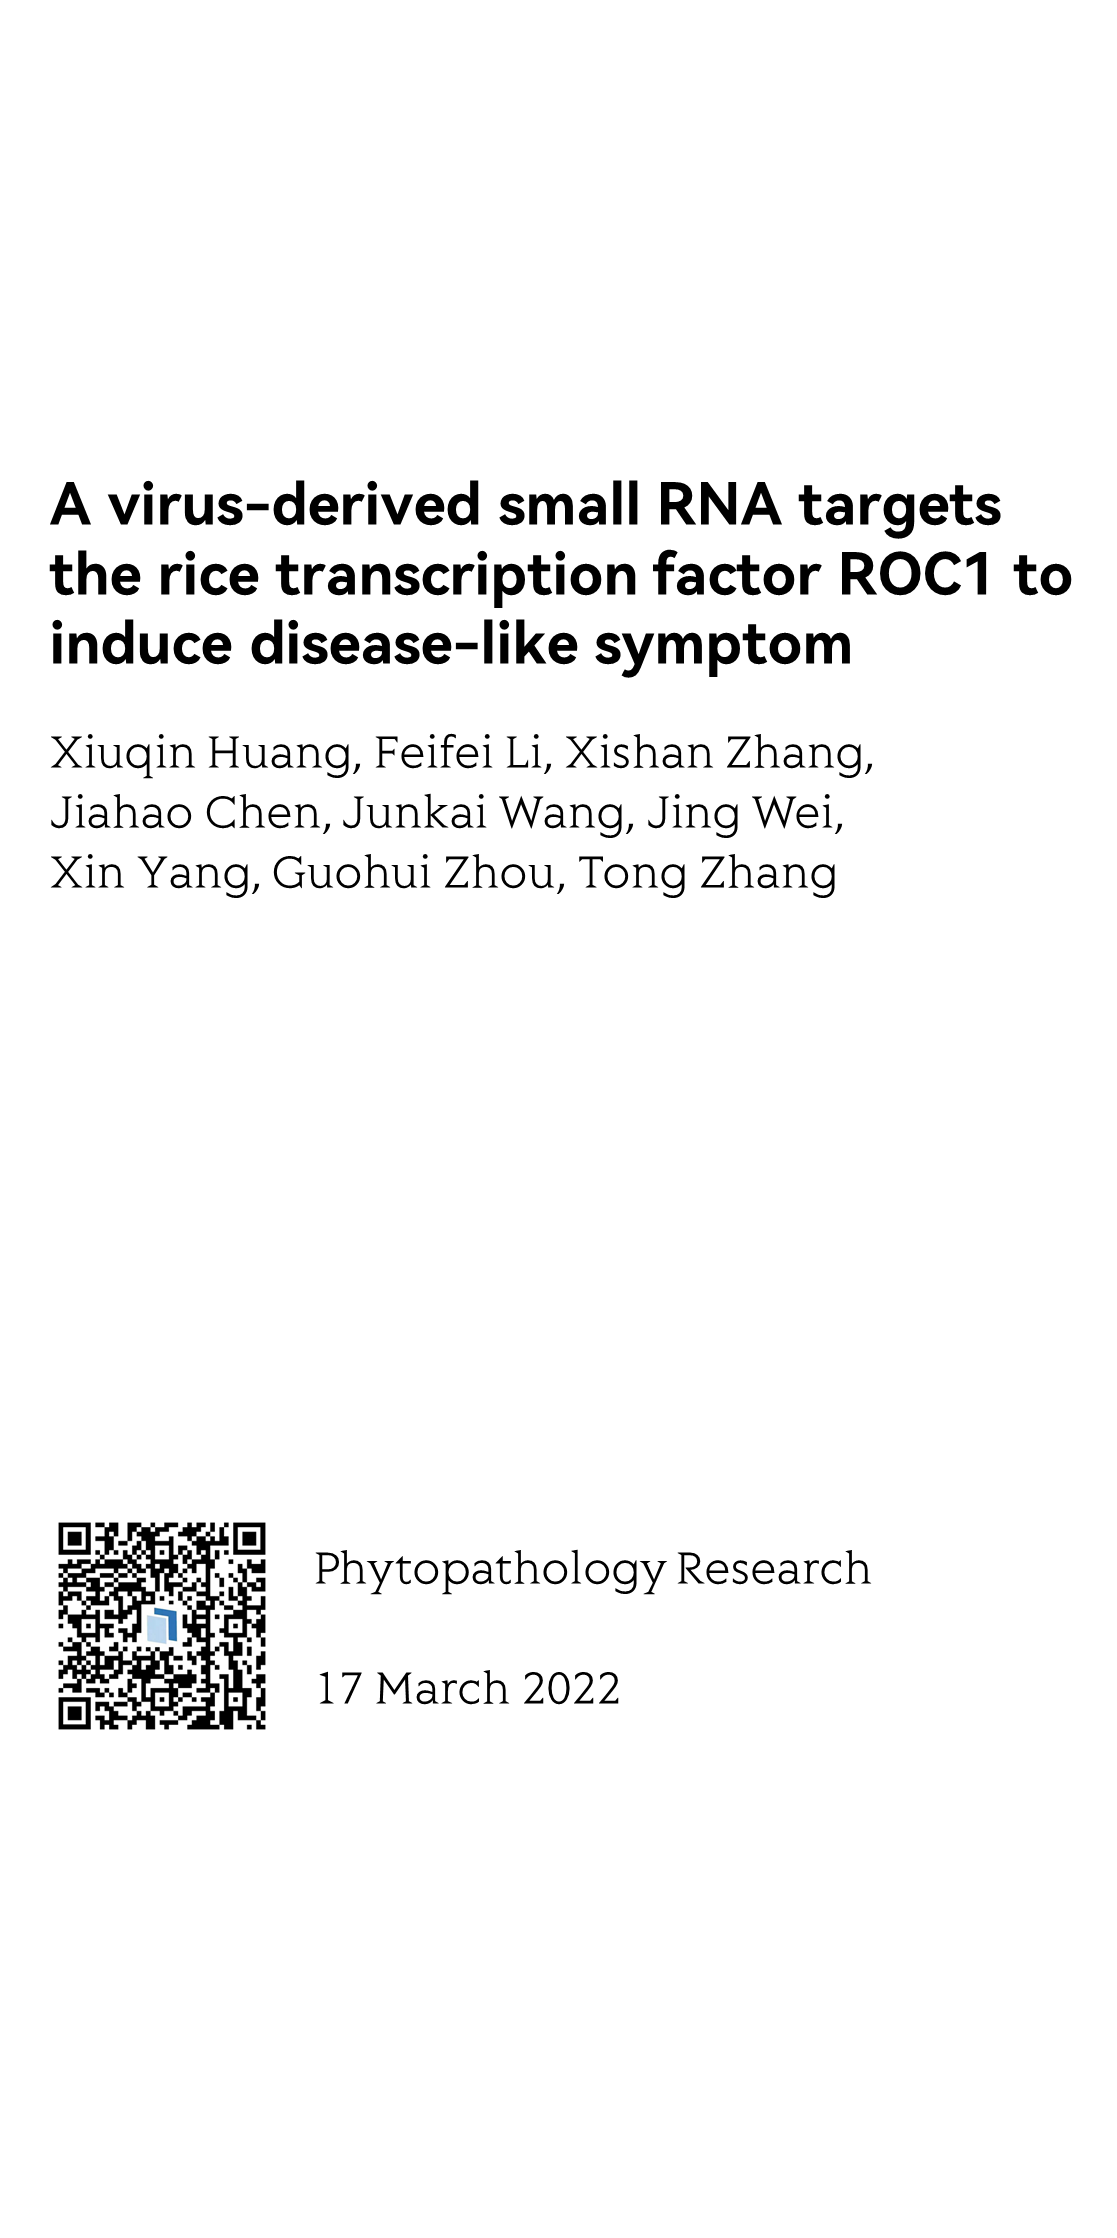 A virus-derived small RNA targets the rice transcription factor ROC1 to induce disease-like symptom_1